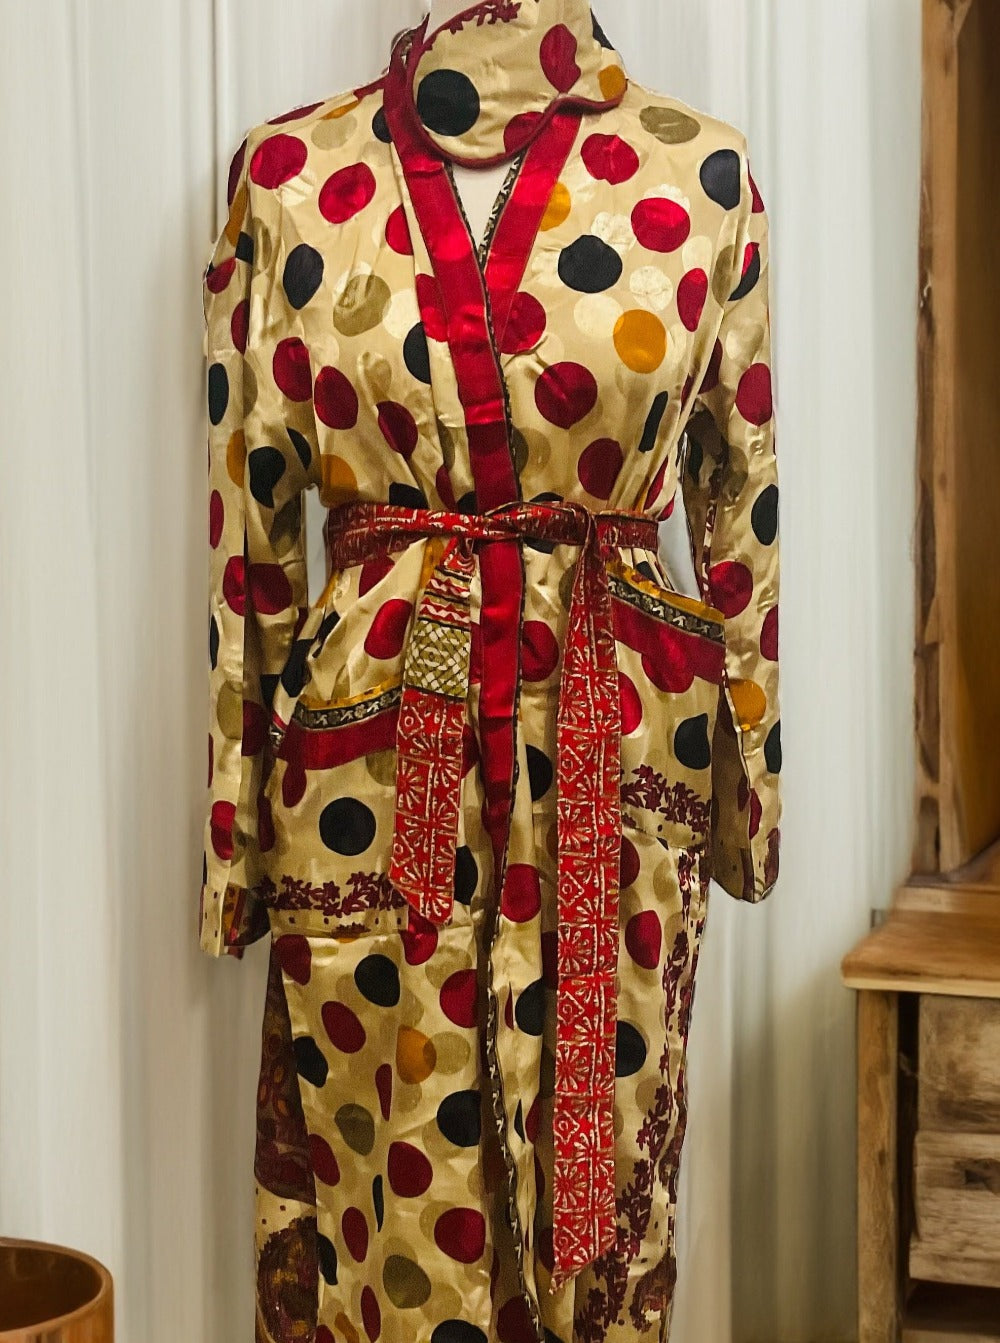 Polka Dot Recycled Sari Dressing Gown Second Nature Online